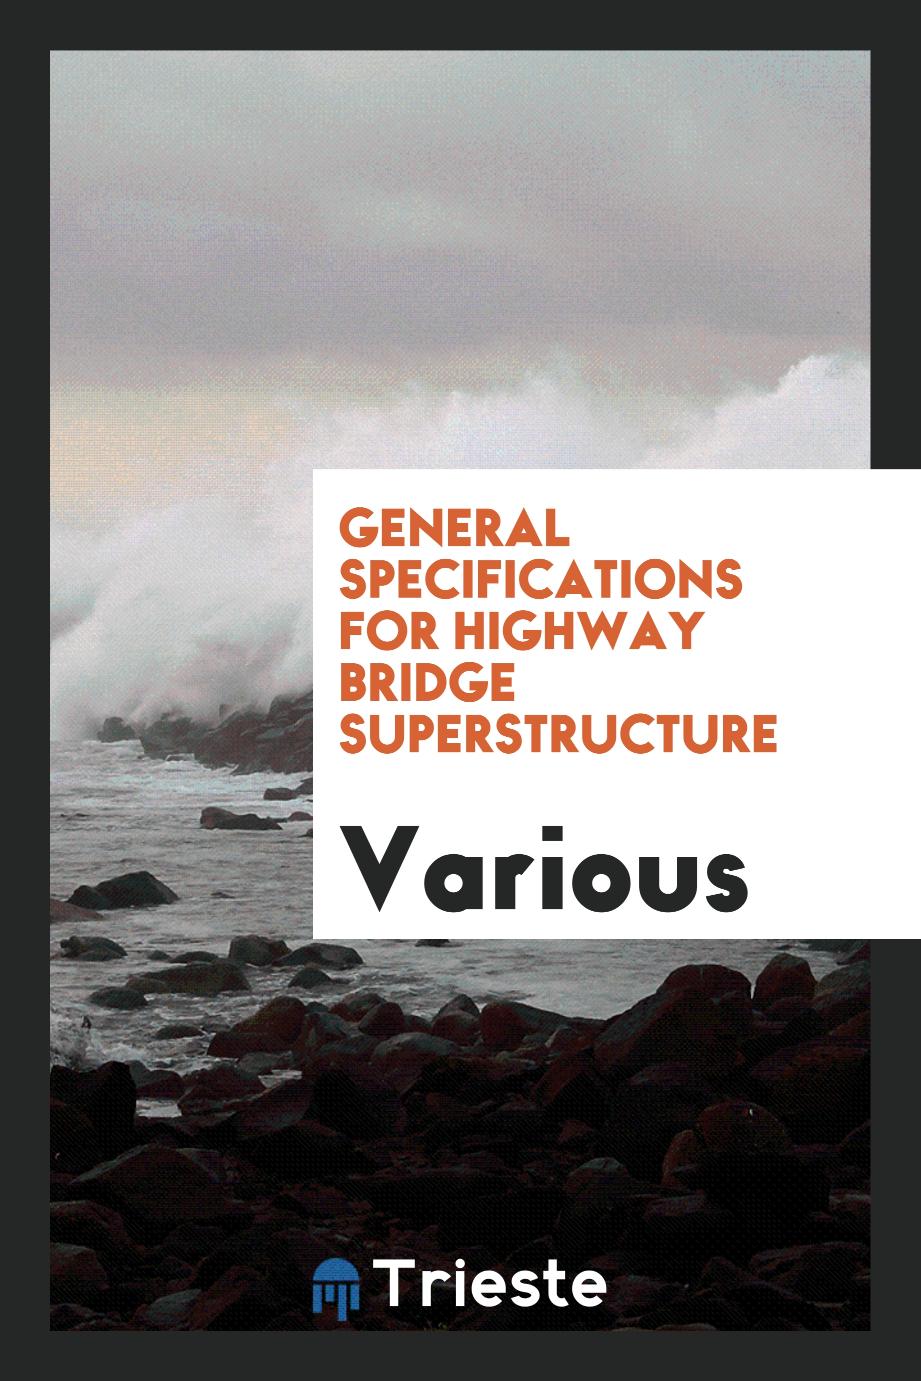 General Specifications for Highway Bridge Superstructure